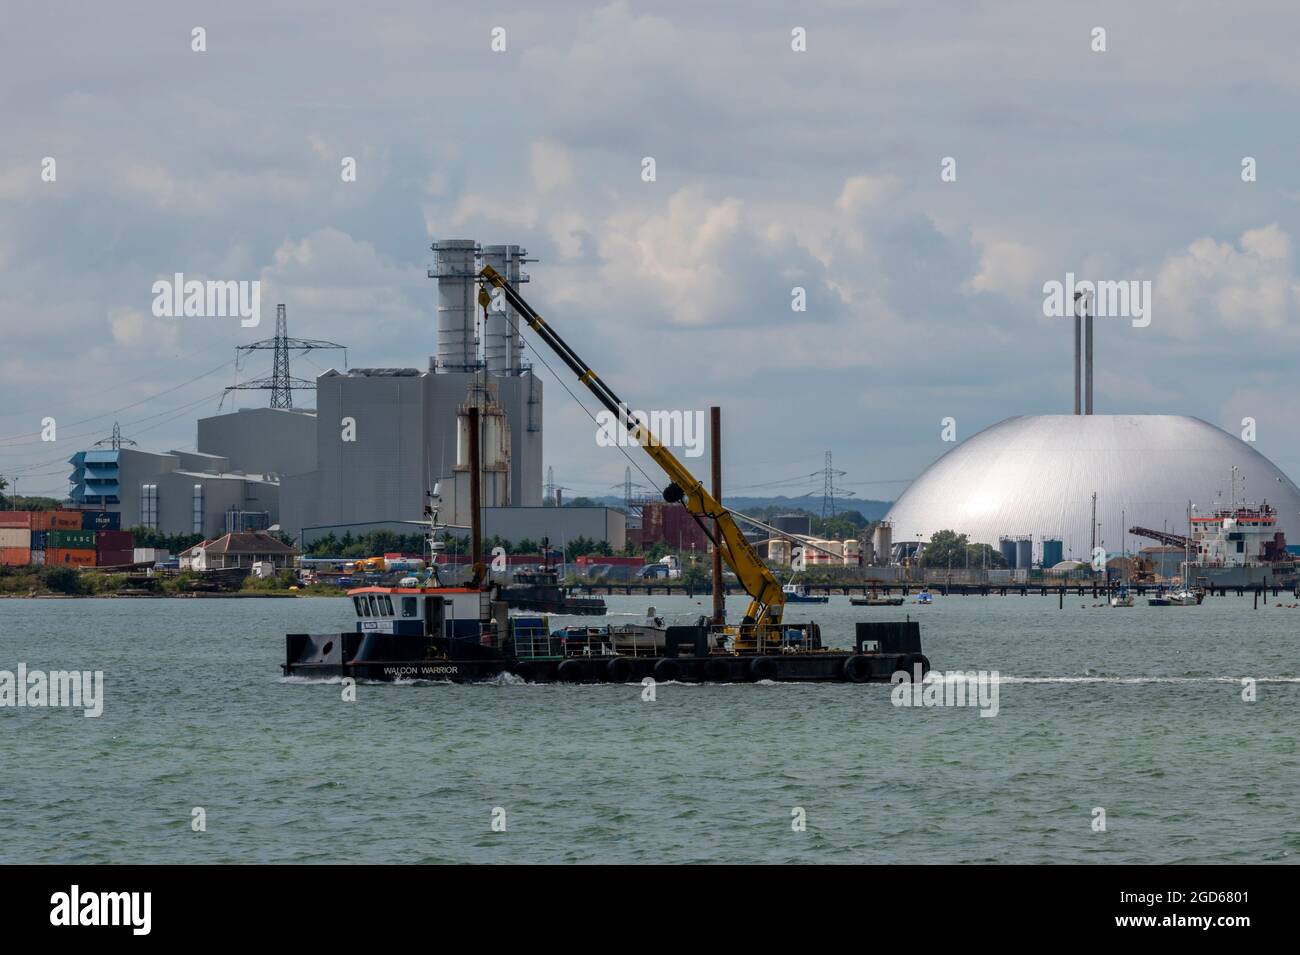 floating crane at work in southampton docks, marine services in port of southampton,barge with crane, marine barge carrying a crane, floating crane. Stock Photo